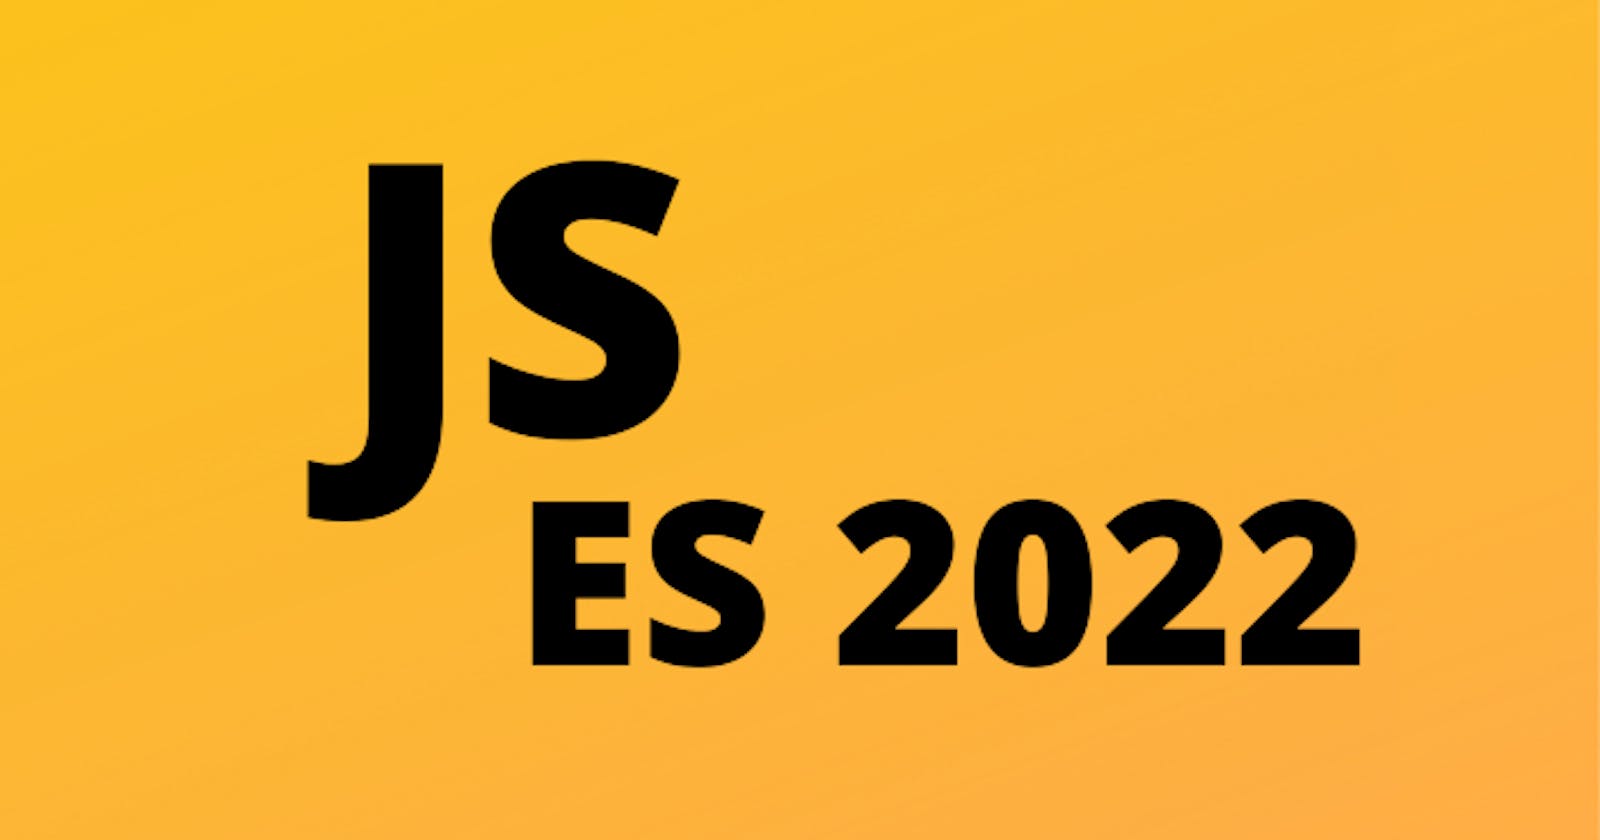 What's new in ES2022?